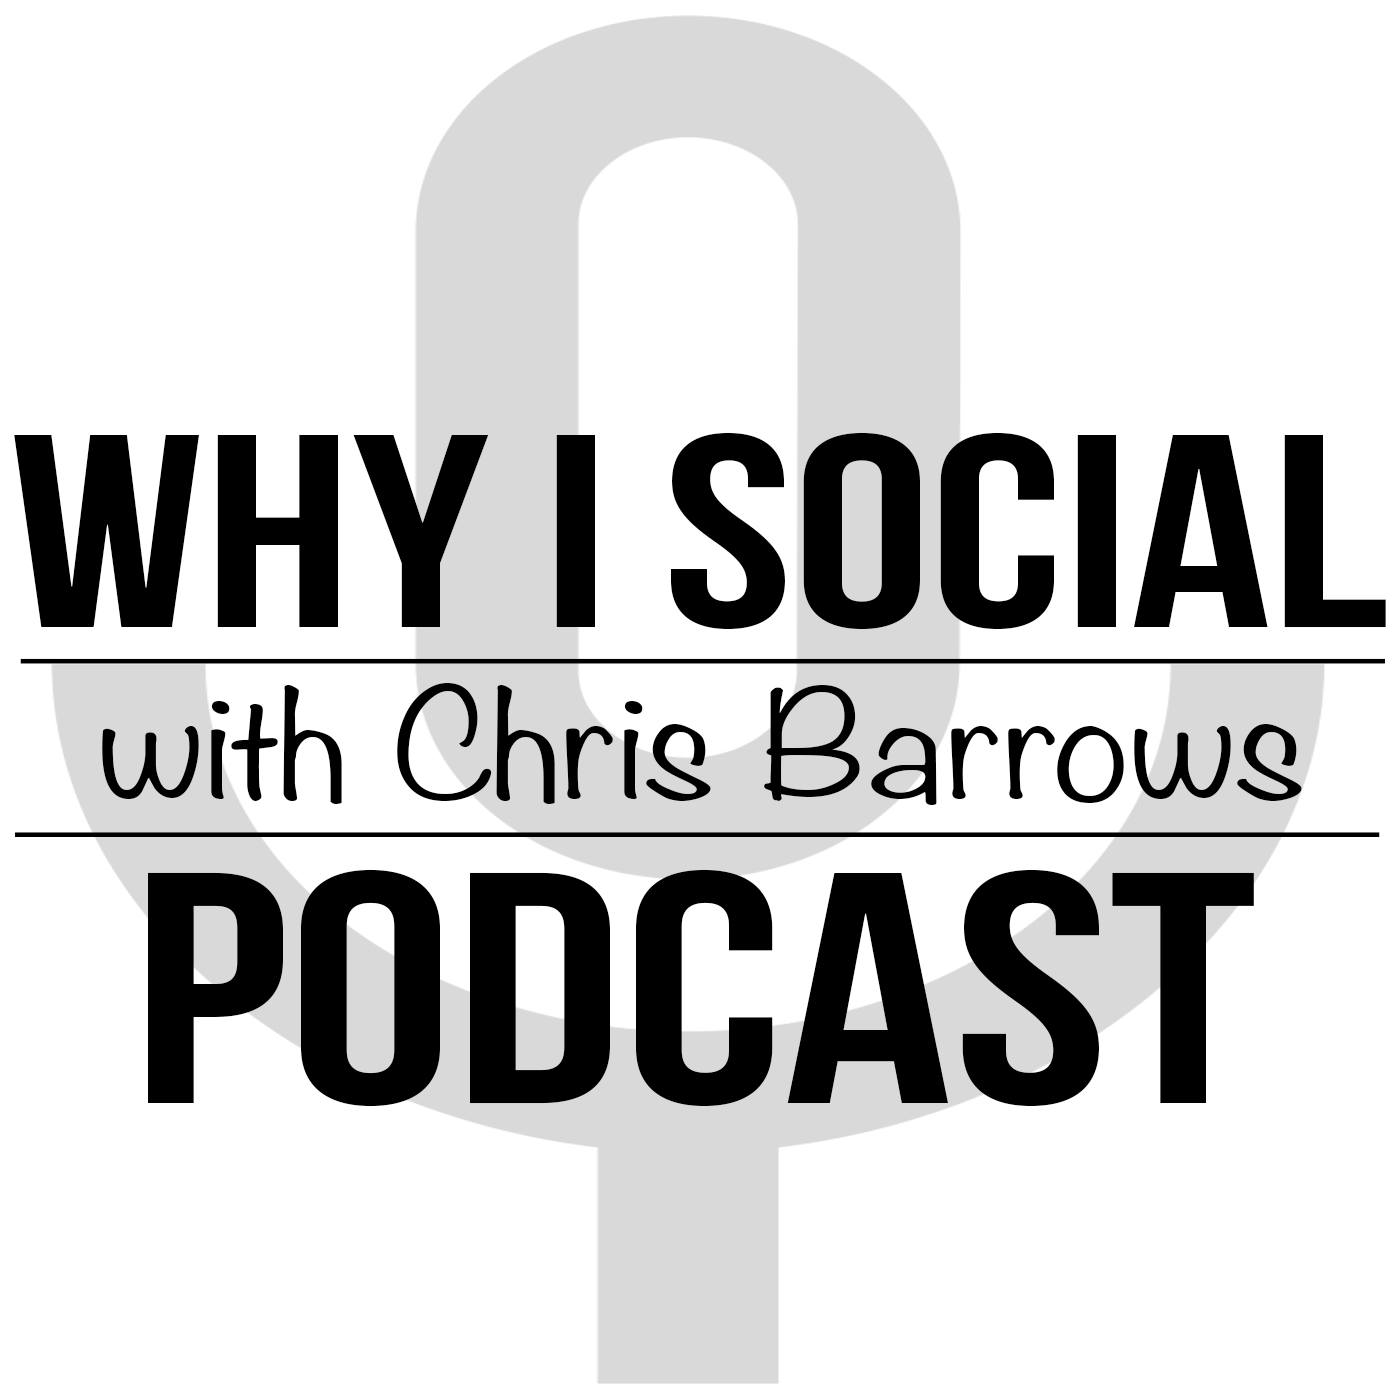 The National Institute for Social Media is proud to be the official sponsor of the ‘Why I Social’ Podcast